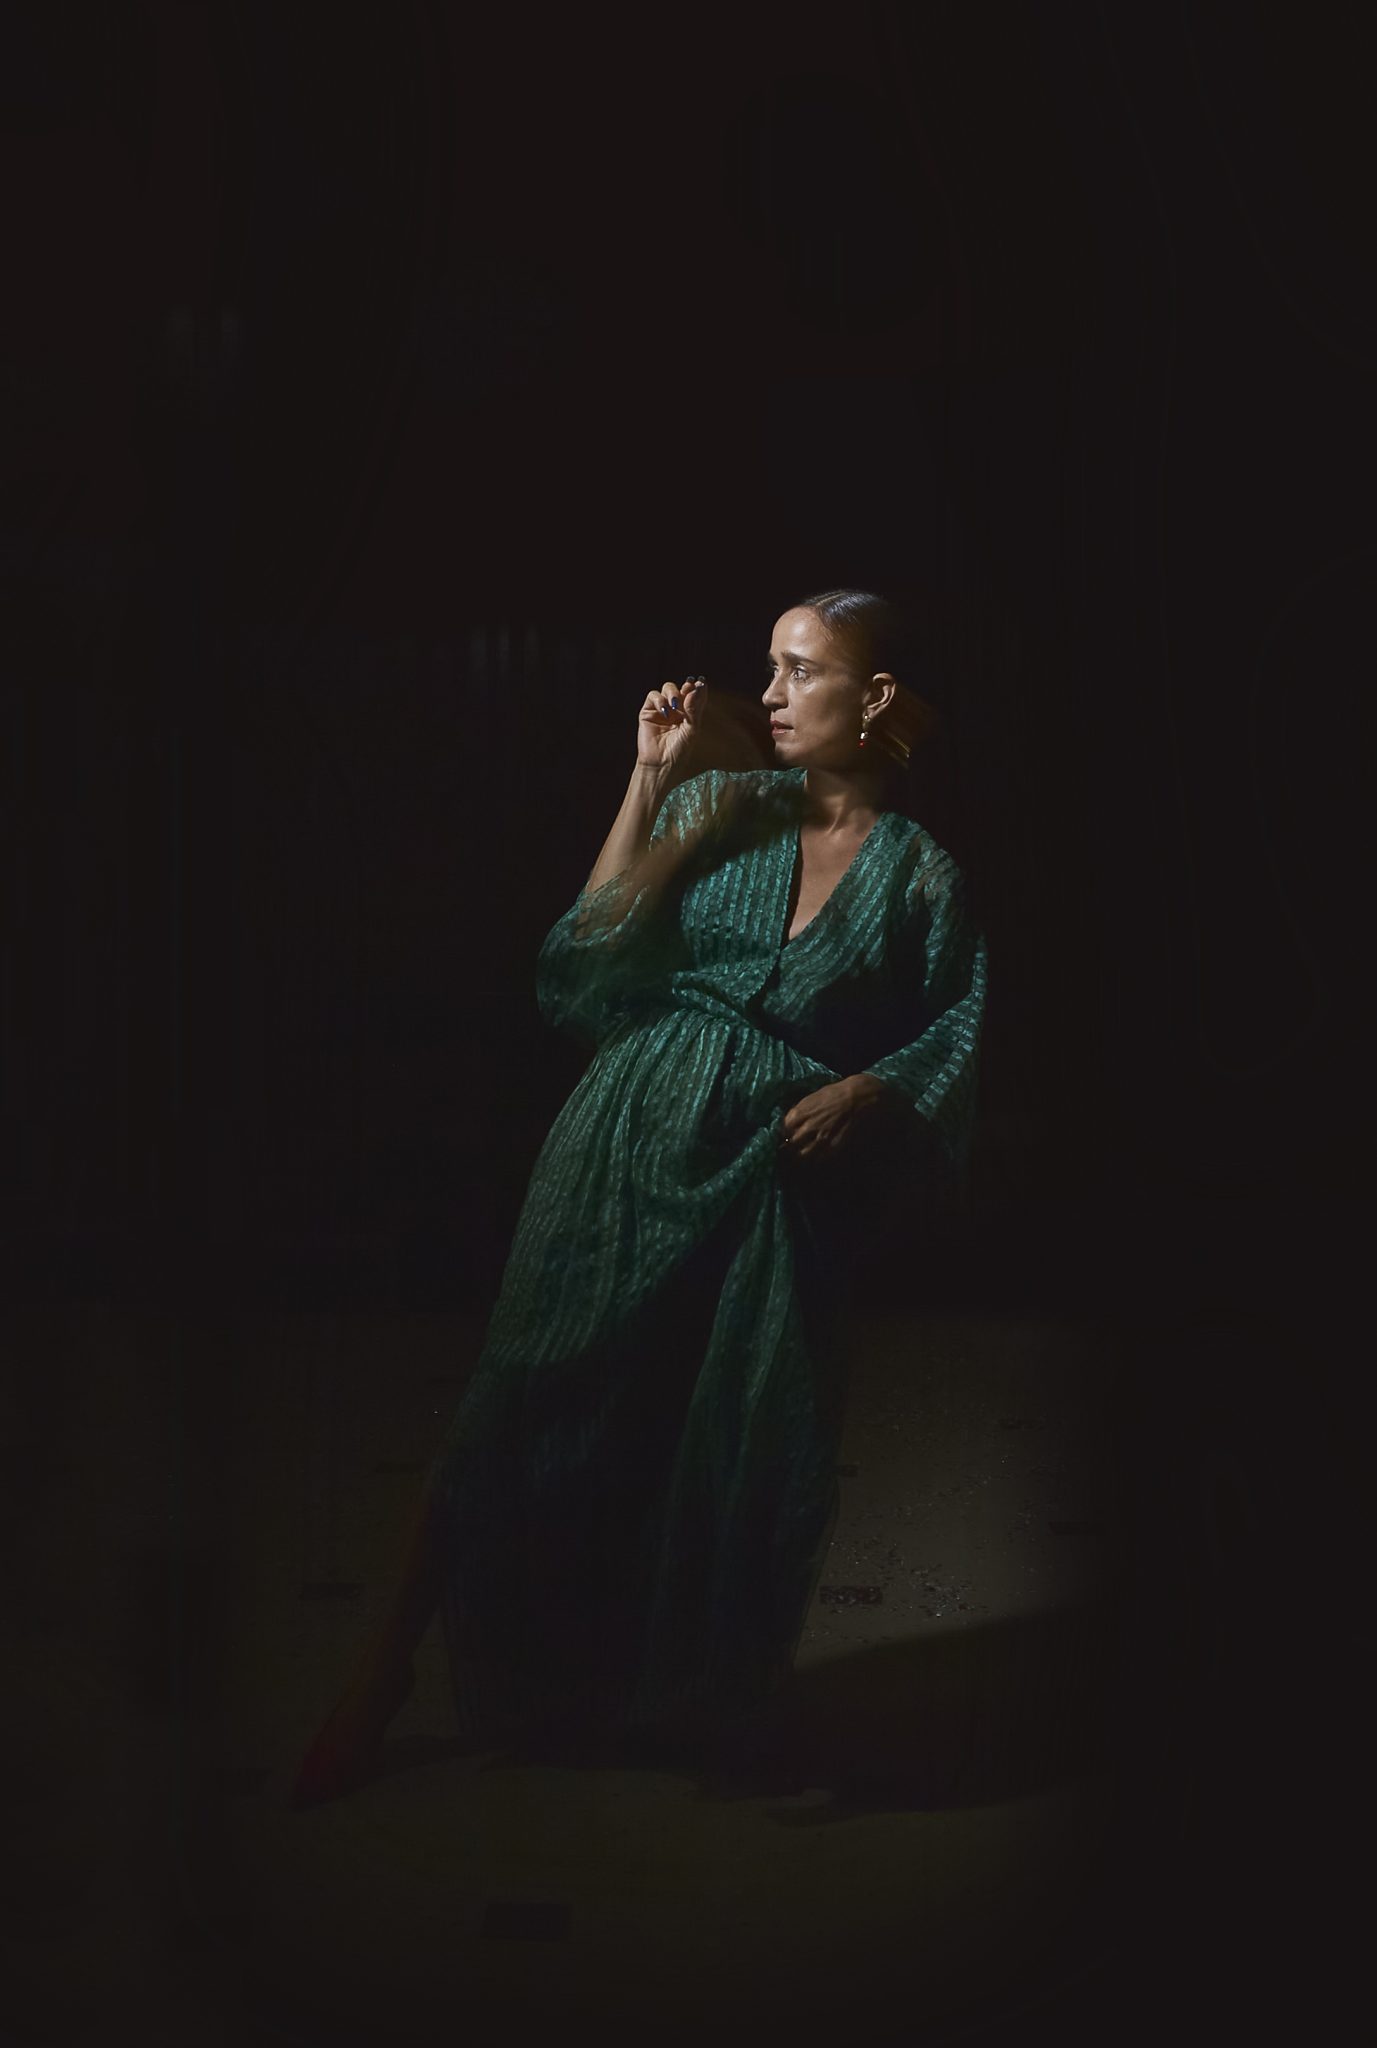 A solitary Julieta Venegas, caught in a contemplative moment, bathed in a sliver of light against the surrounding darkness.